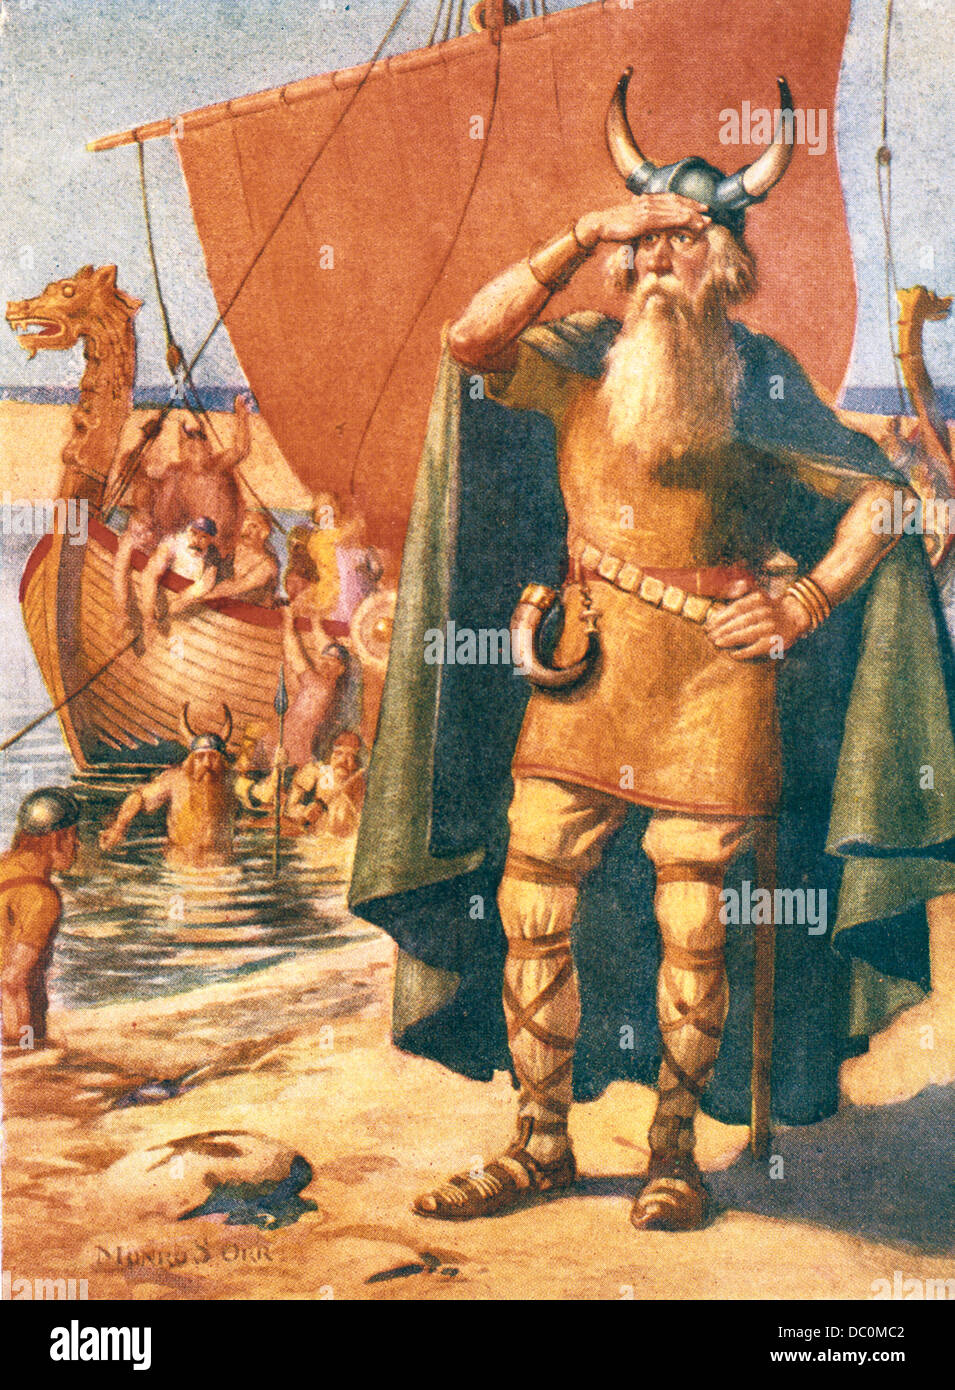 VIKING EXPLORERS LANDING ON AN UNKNOWN SHORE DURING MEDIEVAL TIMES 8TH TO 11TH CENTURY Stock Photo